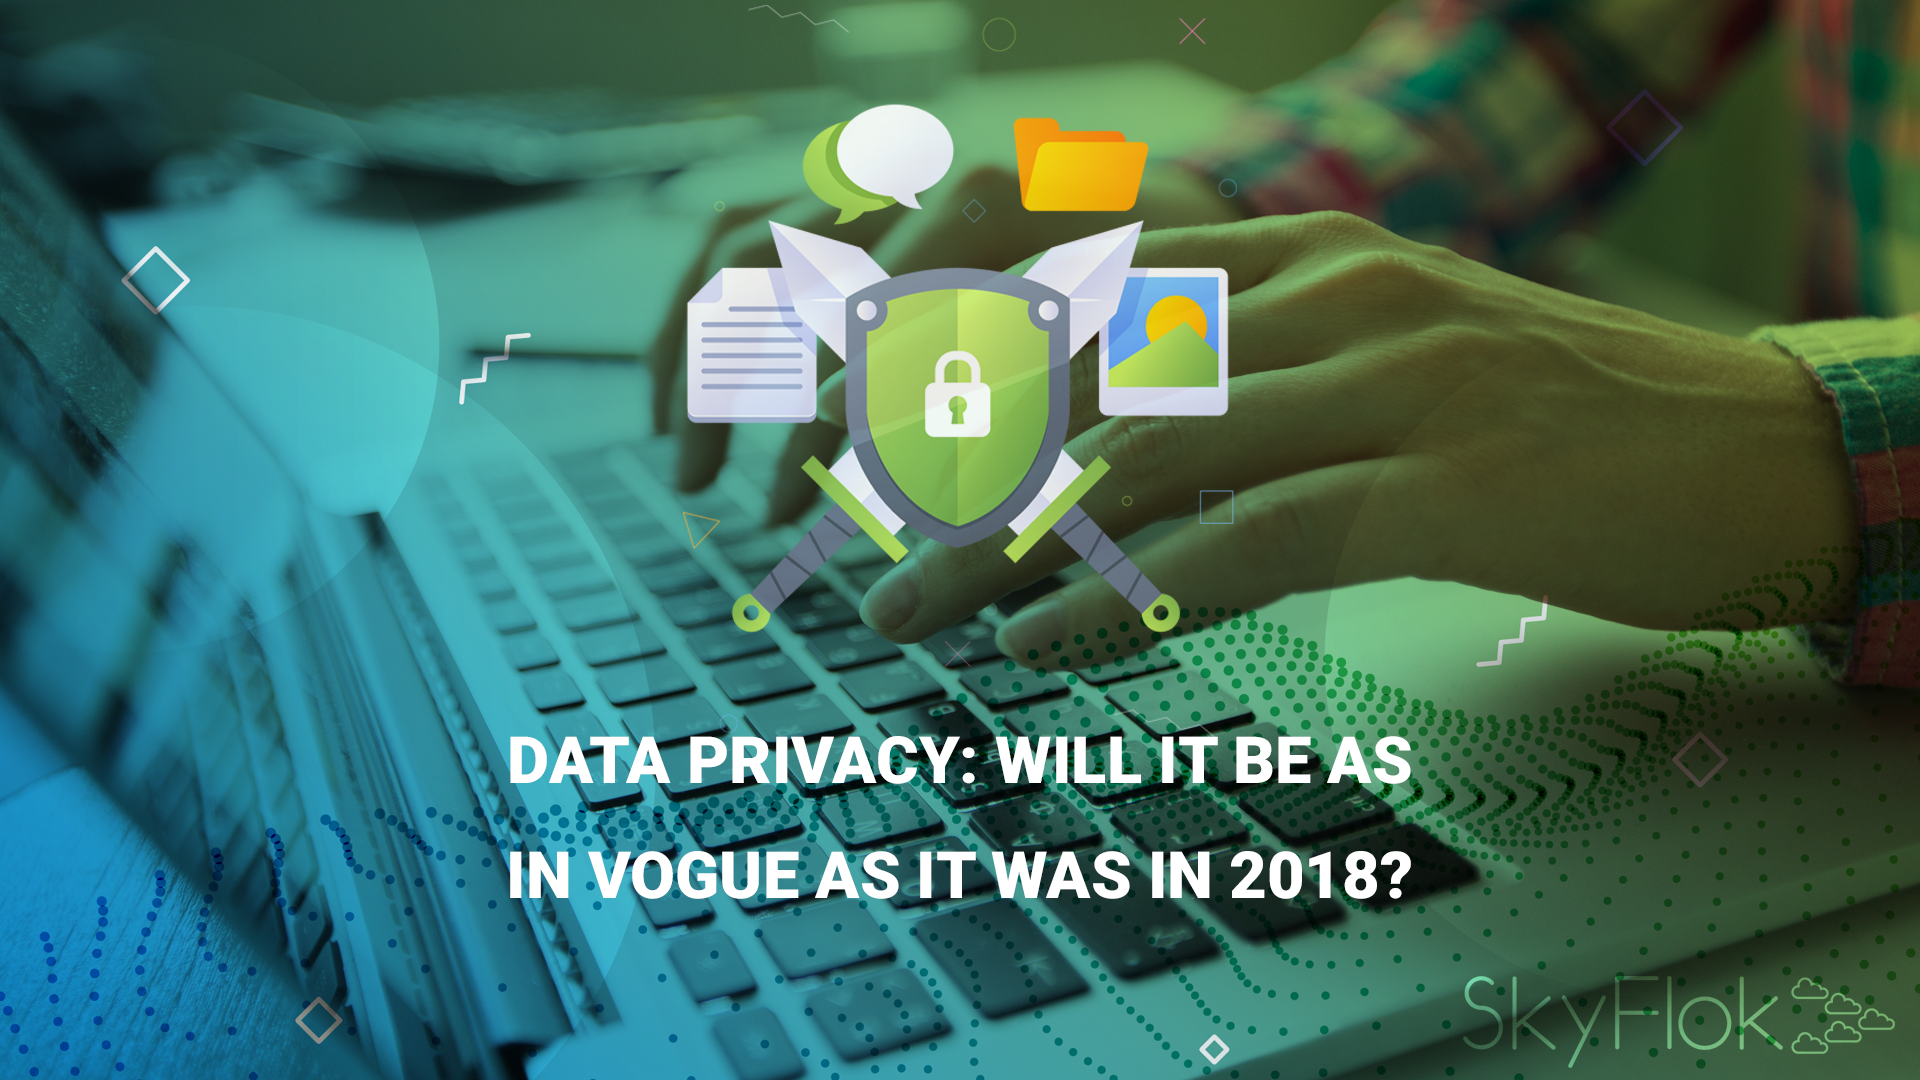 Data privacy: will it be as in vogue as it was in 2018?